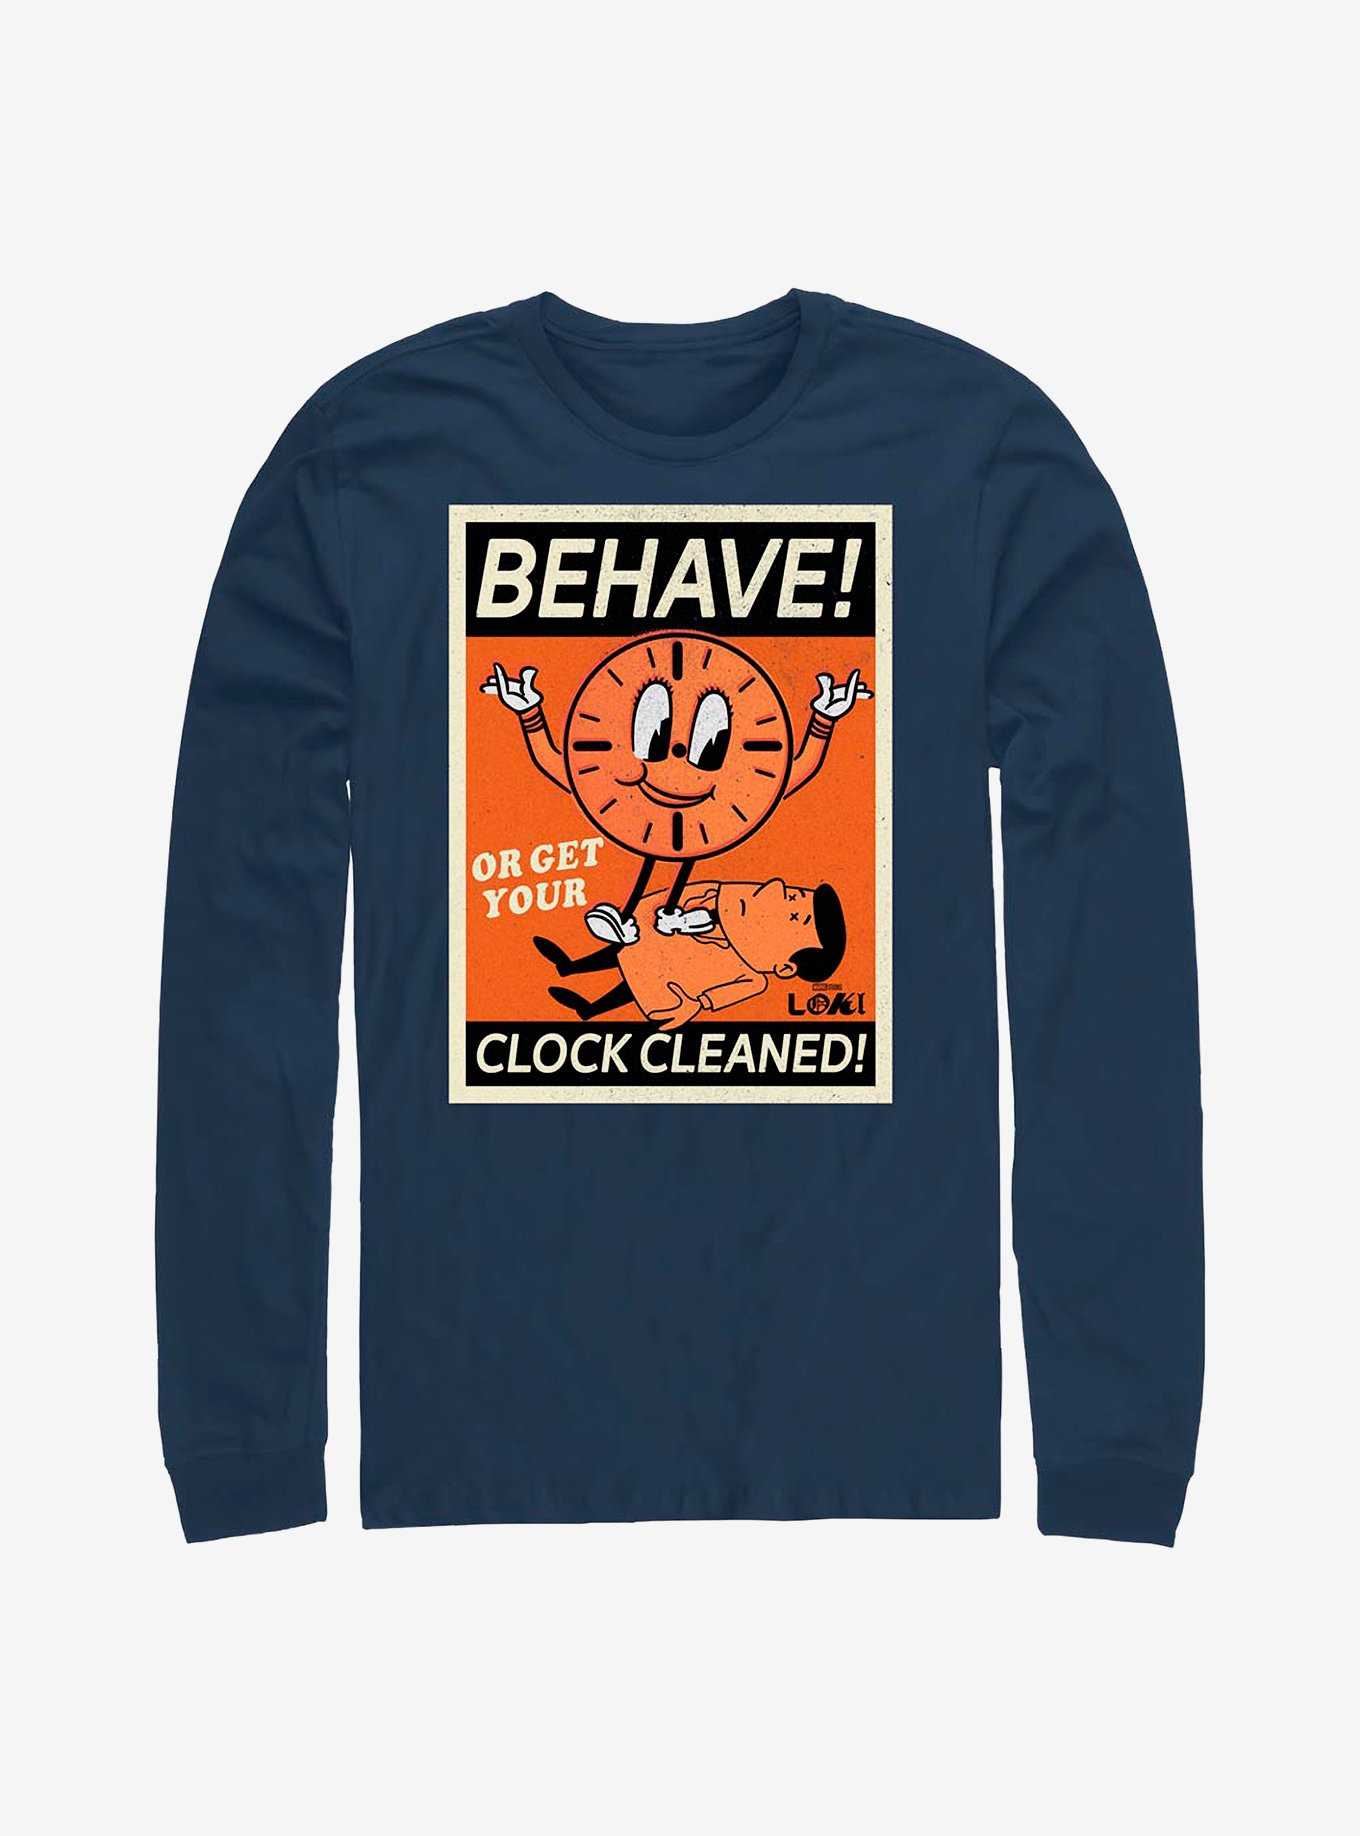 Marvel Loki Behave! Or Get Your Clock Cleaned! Long-Sleeve T-Shirt, , hi-res